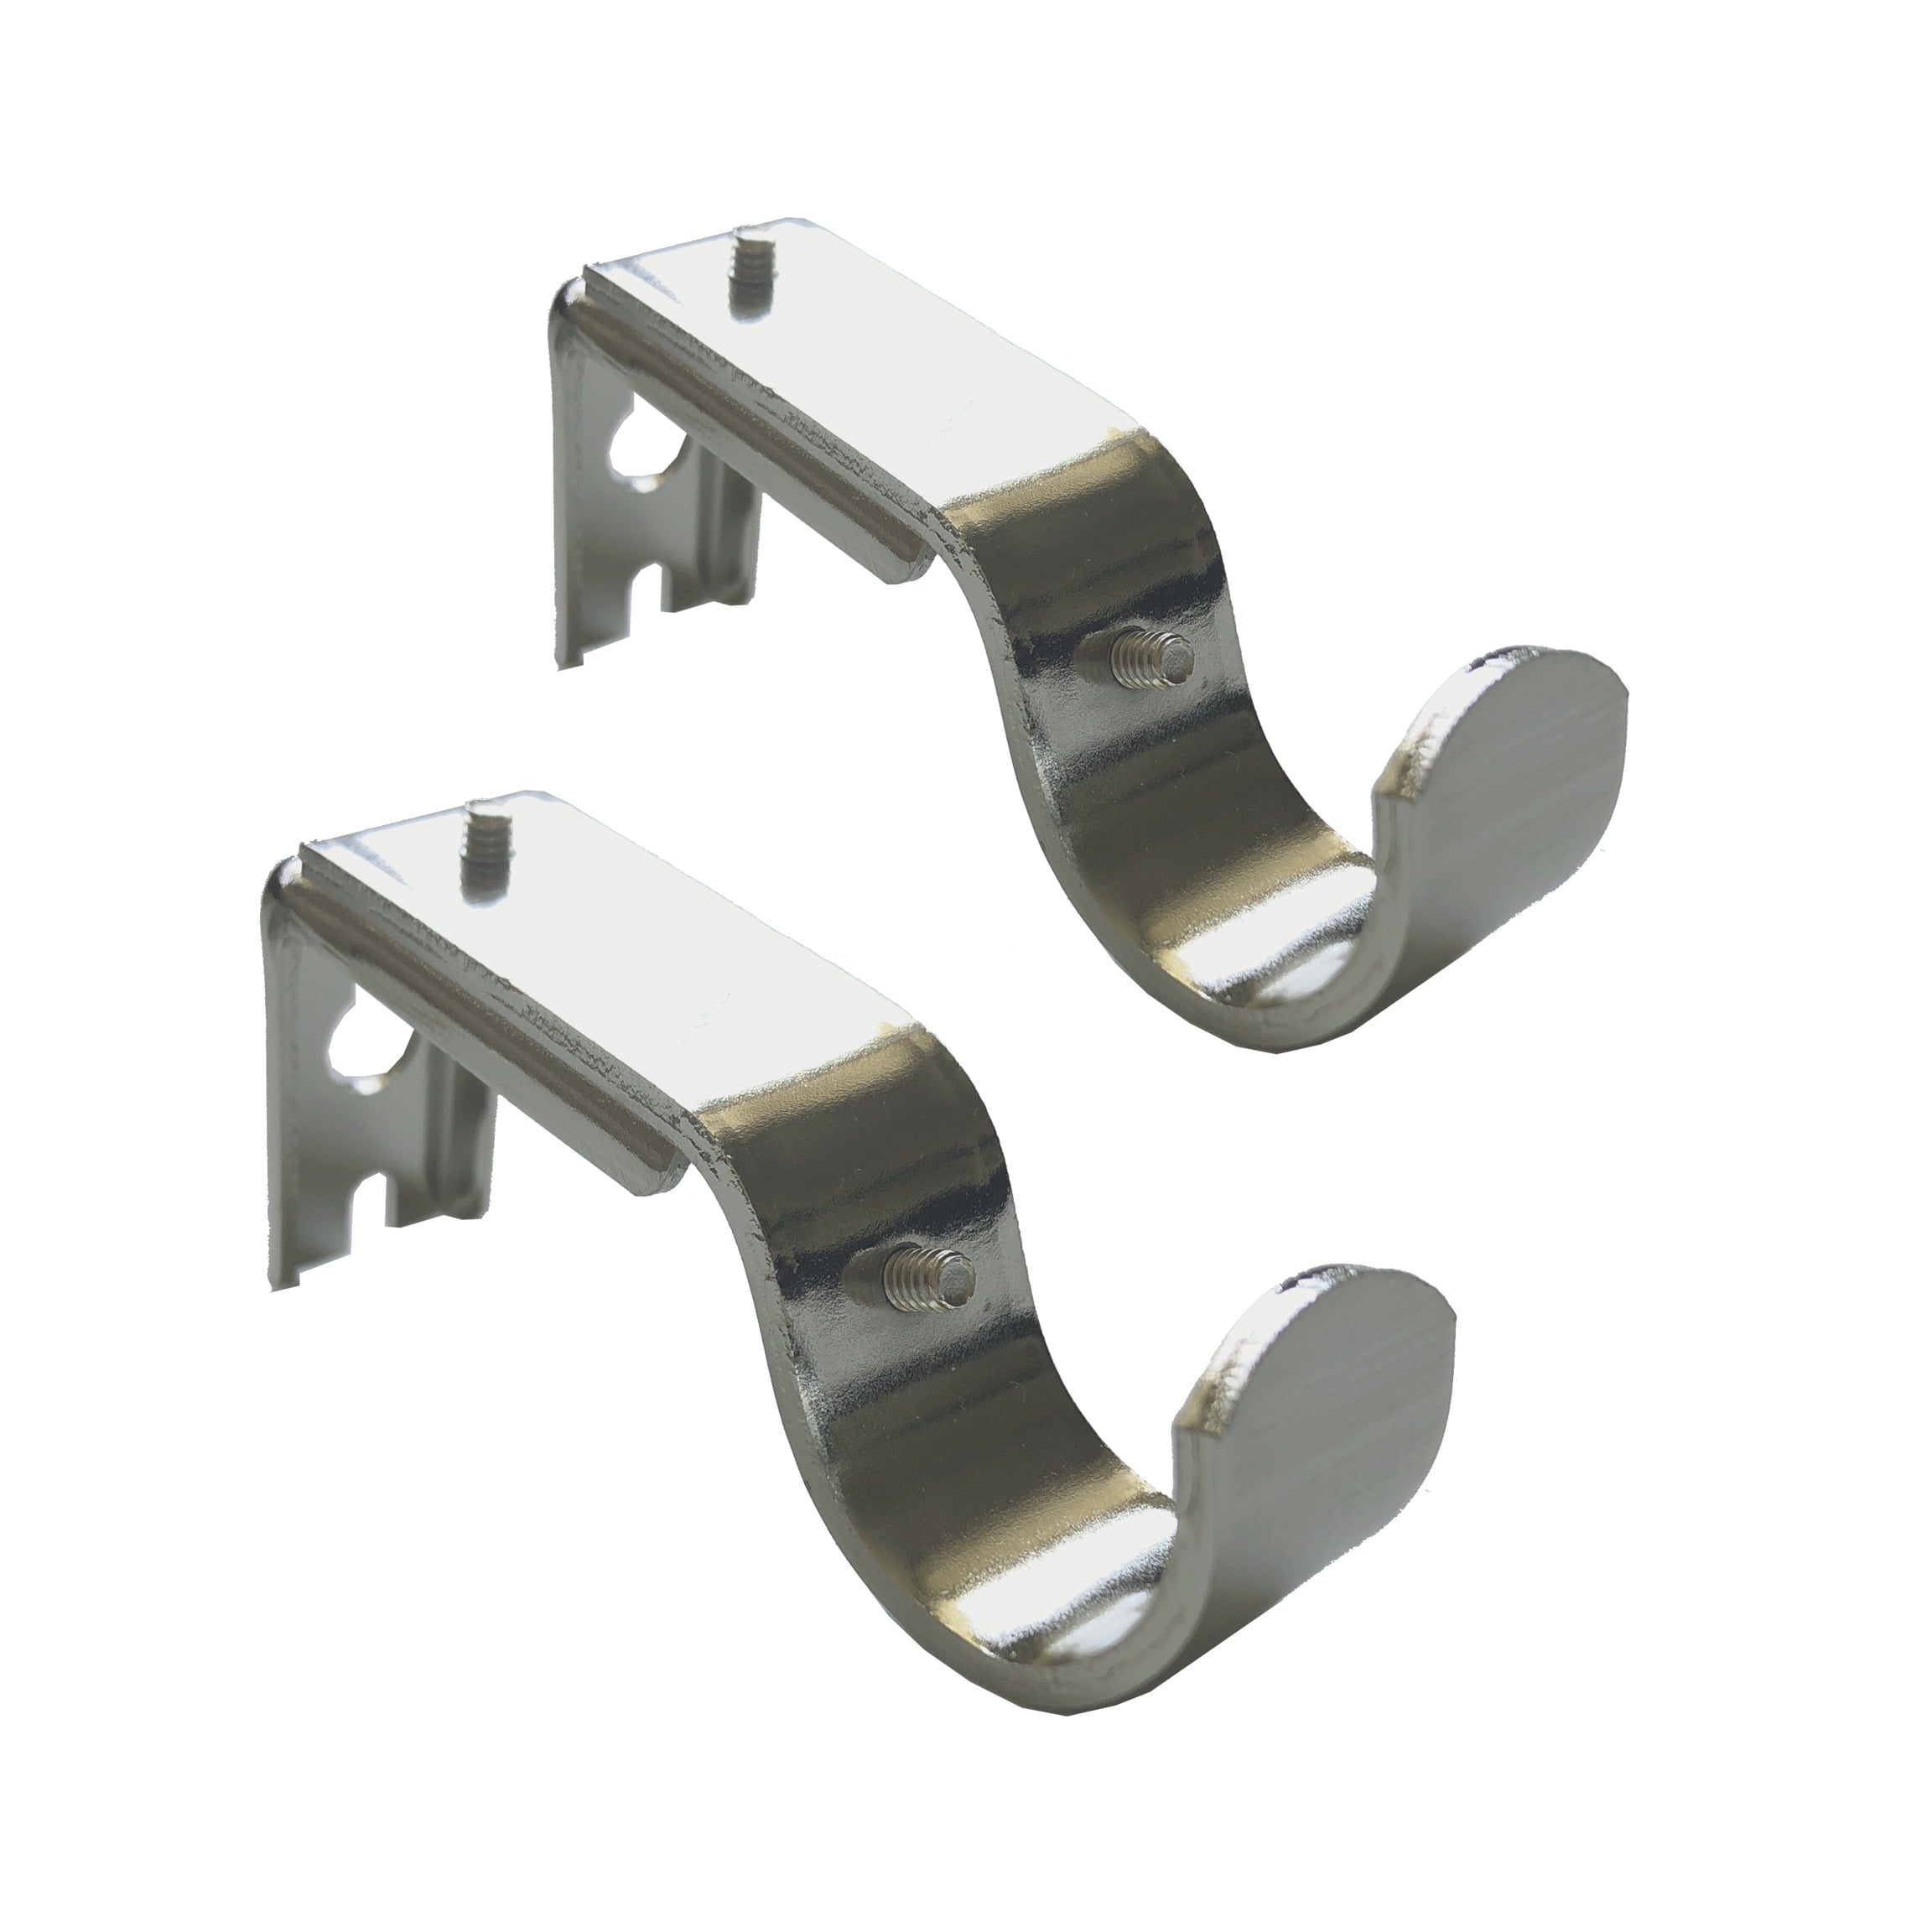 Better Homes & Gardens Adjustable Curtain Rod Brackets for 3/4" to 1" Diameter Rods, Nickel